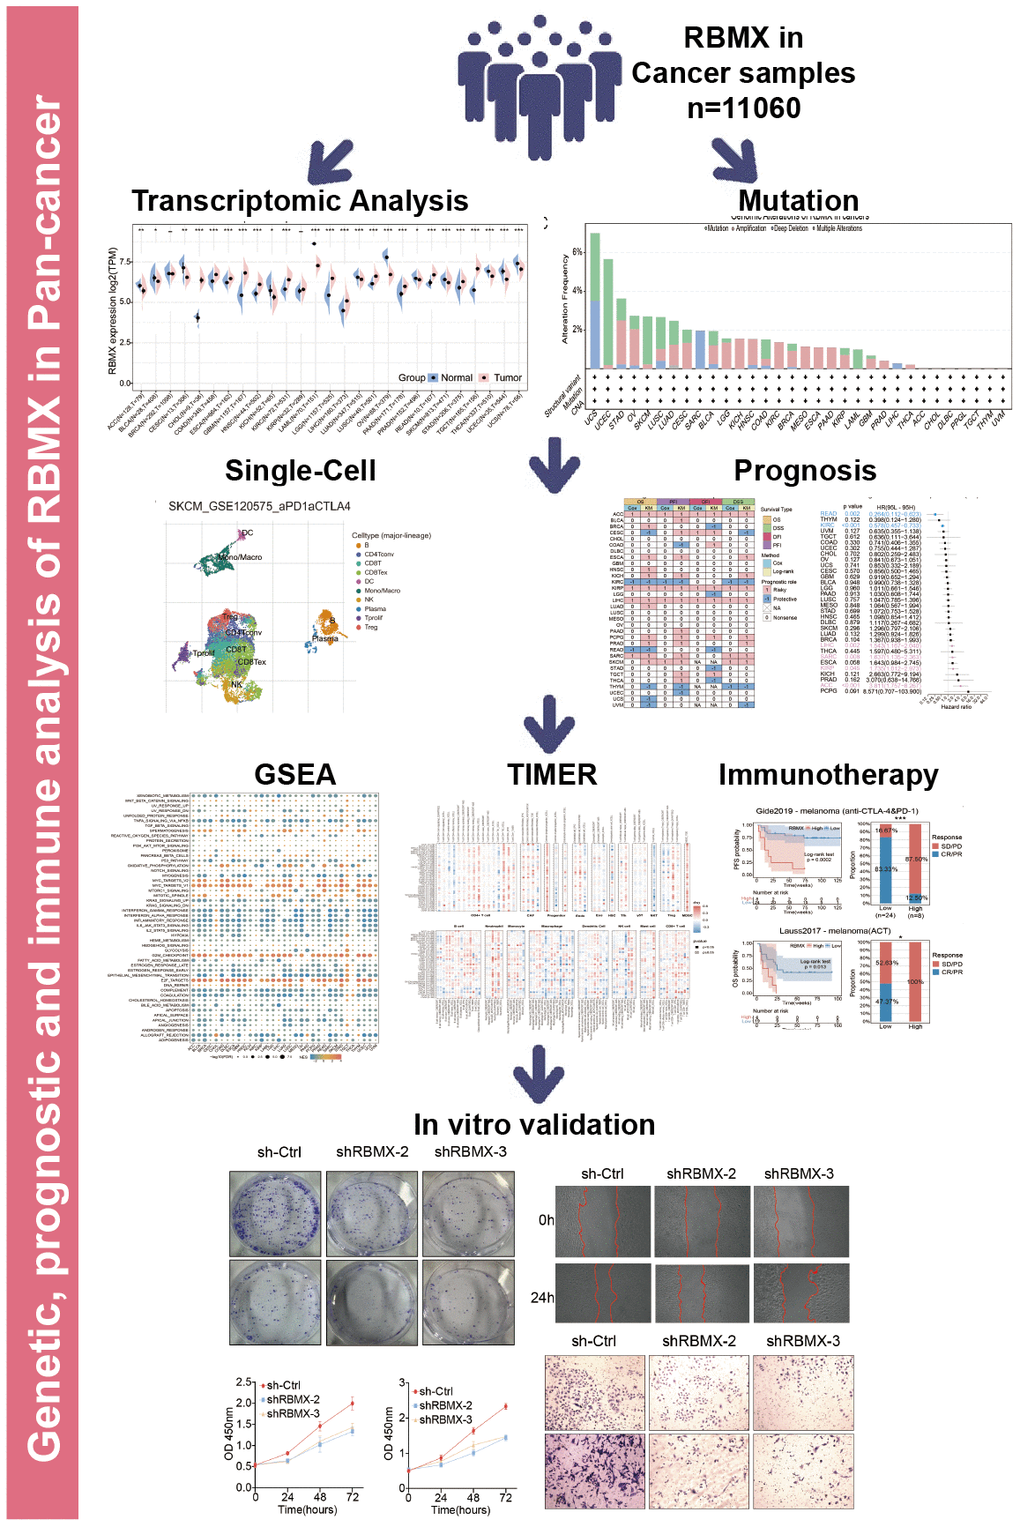 Predictive role of RBMX and its relationships with immune regulators, TMB, and MSI. (A) Correlations of RBMX expression with 47 types of immune regulators in the pan-cancer setting, illustrated by the Spearman correlation analysis. Red and blue squares represent positive and negative correlations, respectively. (B) Correlations between RBMX expression and MSI in the pan-cancer setting. (C) Correlations between RBMX expression and TMB in the pan-cancer setting. (D) Low- and high-RBMX subgroups distinguished based on the Kaplan–Meier curves in the Gide2019 cohort (anti-CTLA-4 and anti-PD-1, melanoma). Proportion of patients with melanoma who responded to anti-CTLA-4 and anti-PD-1 therapy in the low- and high-RBMX subgroups of the IMvigor210 cohort. (E) Low- and high-RBMX subgroups distinguished based on the Kaplan–Meier curves in the Riaz2017 cohort (anti-PD-1, melanoma). Proportion of patients with melanoma who responded to anti-PD-1 therapy in the low- and high-RBMX subgroups of the IMvigor210 cohort. (F) Low- and high-RBMX subgroups distinguished based on the Kaplan–Meier curves in the Lauss2017 cohort (ACT, melanoma). Proportion of patients with melanoma who responded to ACT therapy in the low- and high-RBMX subgroups of the IMvigor210 cohort. (G) Low- and high-RBMX subgroups distinguished based on the Kaplan–Meier curves in the Vanallen2015 cohort (anti-CTLA-4, melanoma). Proportion of patients with melanoma who responded to ACT therapy in the low- and high-RBMX subgroups of the IMvigor210 cohort. *p 